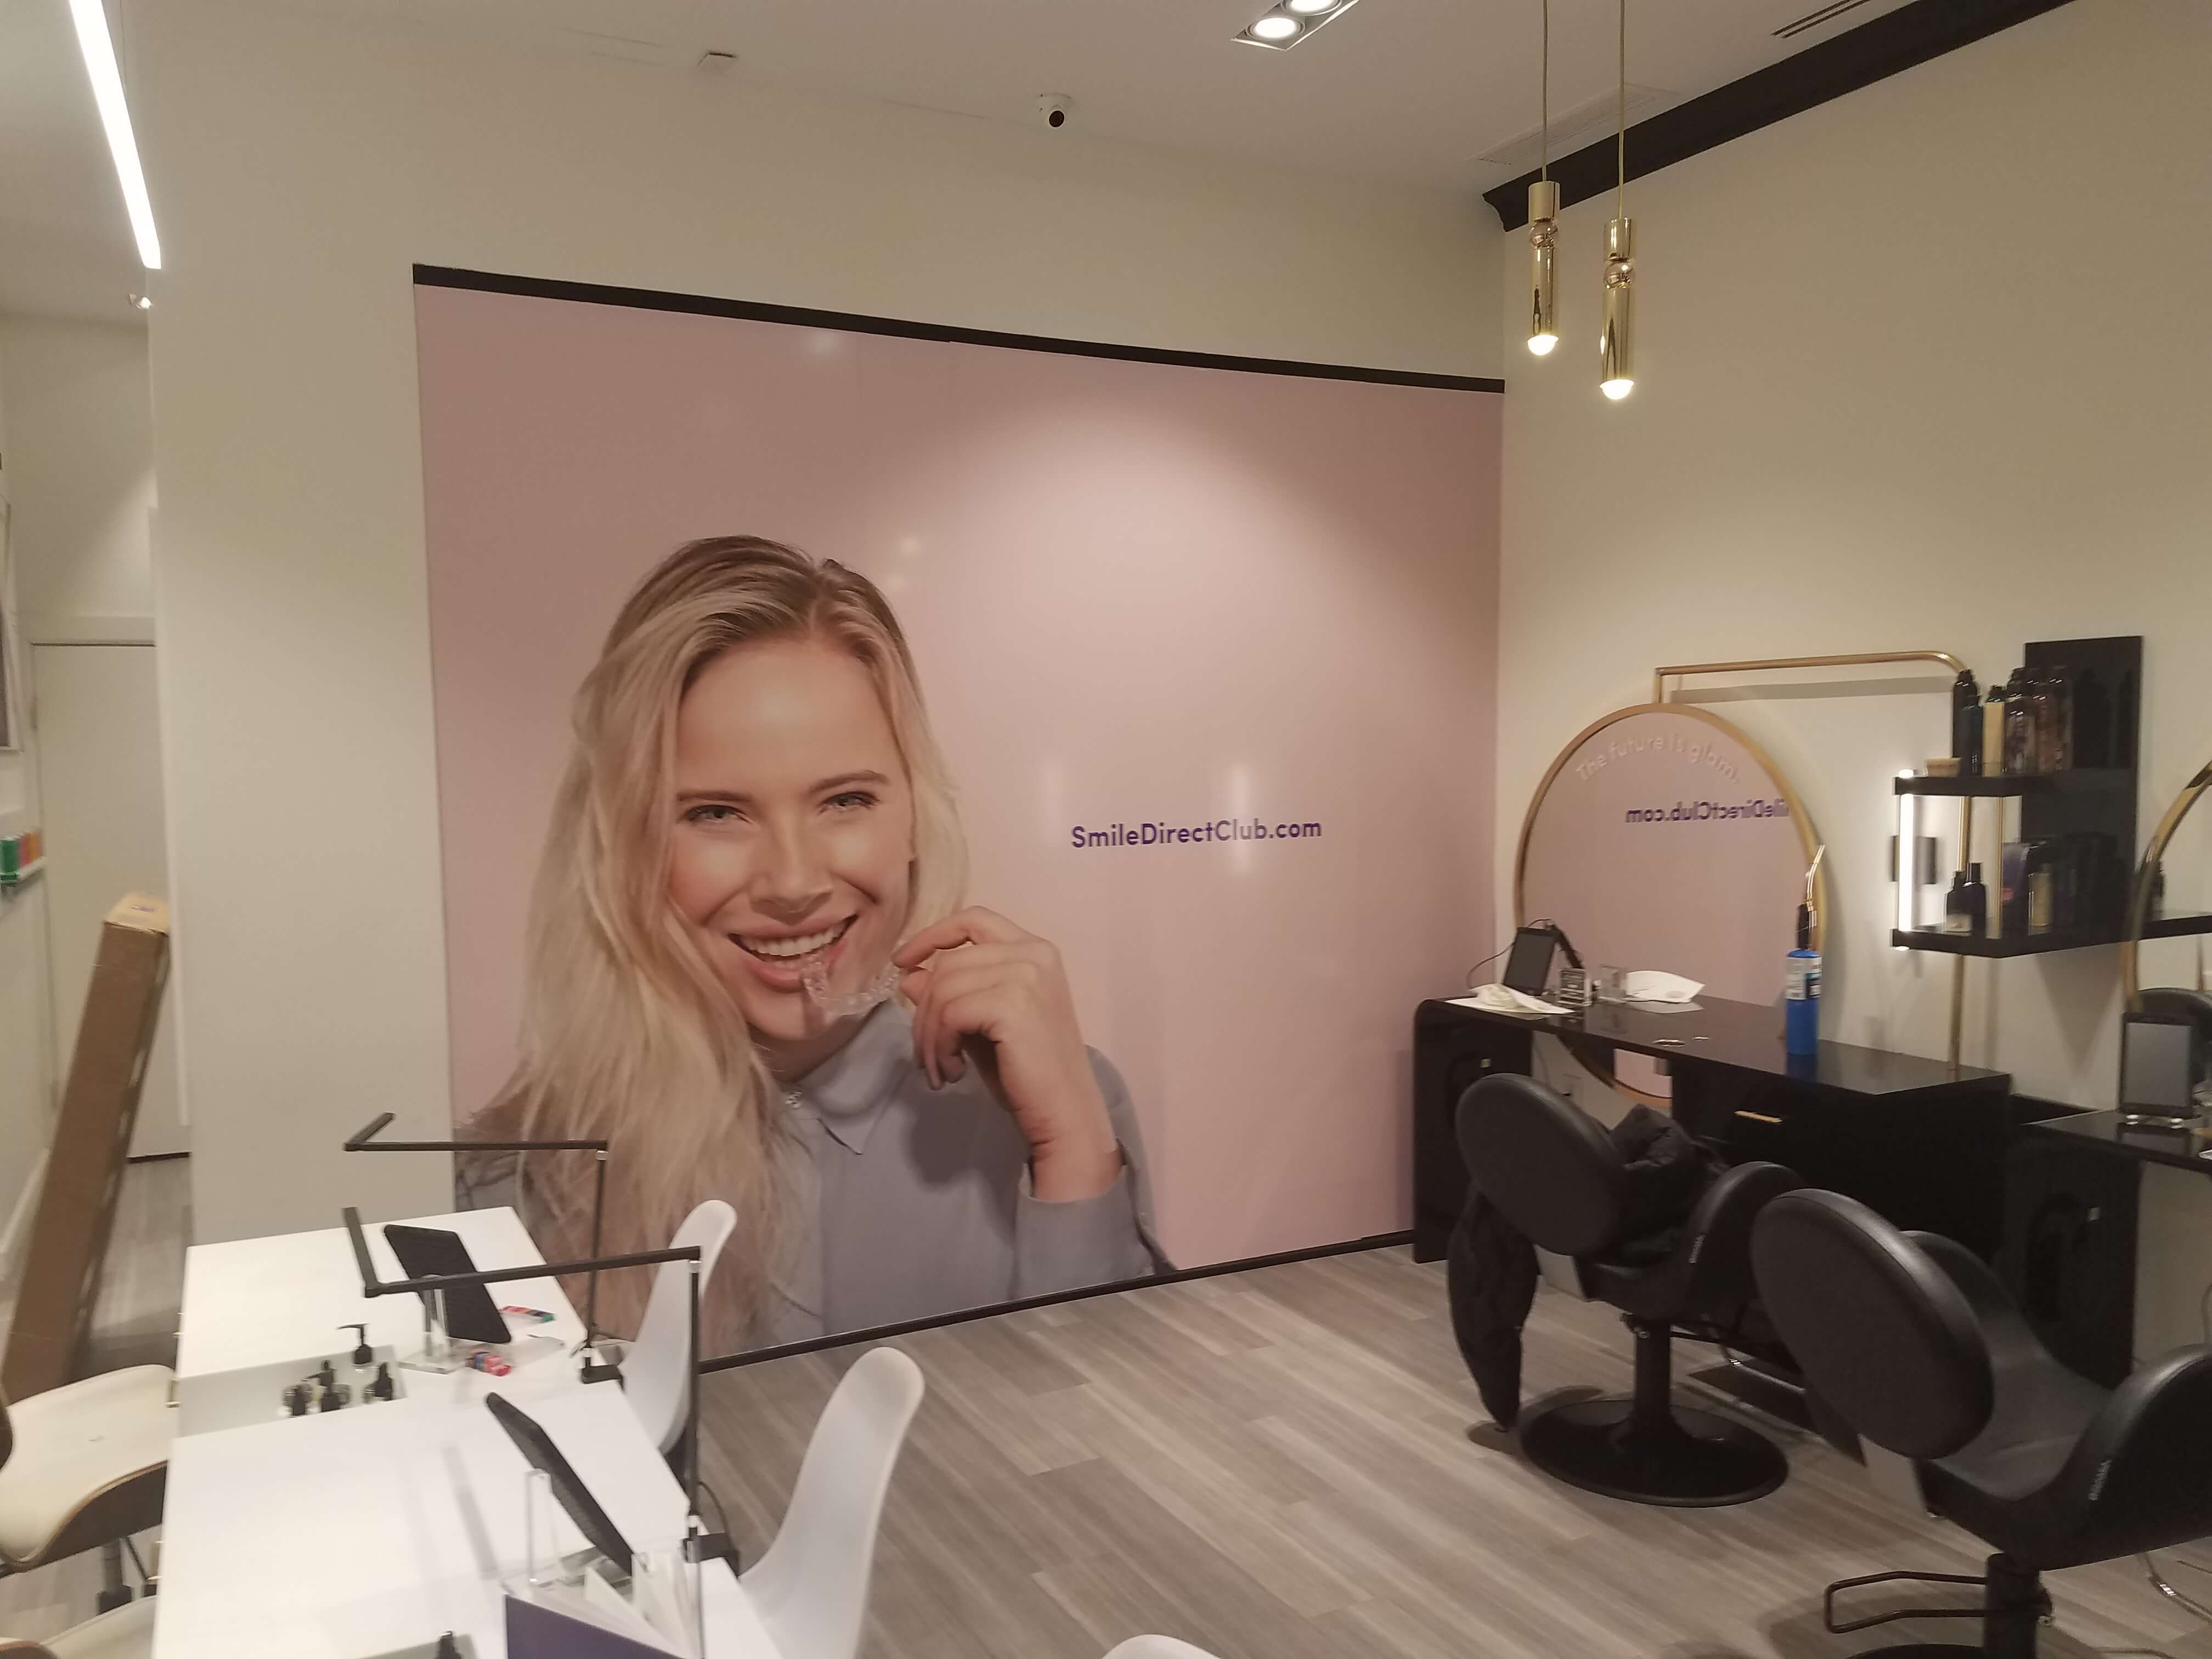 Smile Direct Club In-store Ad wall